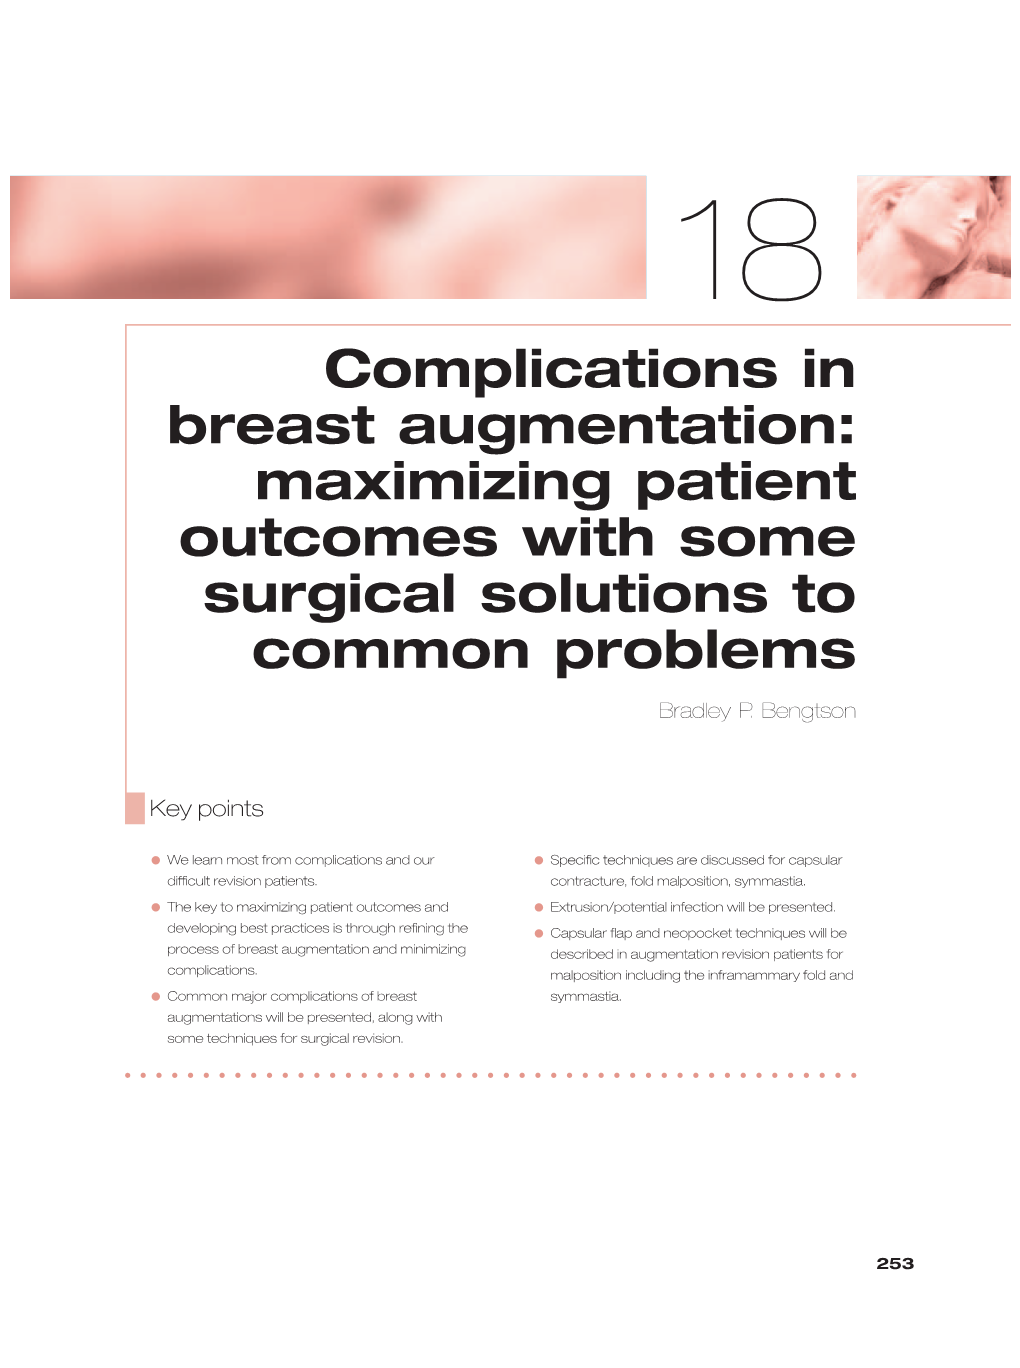 Complications in Breast Augmentation: Maximizing Patient Outcomes with Some Surgical Solutions to Common Problems